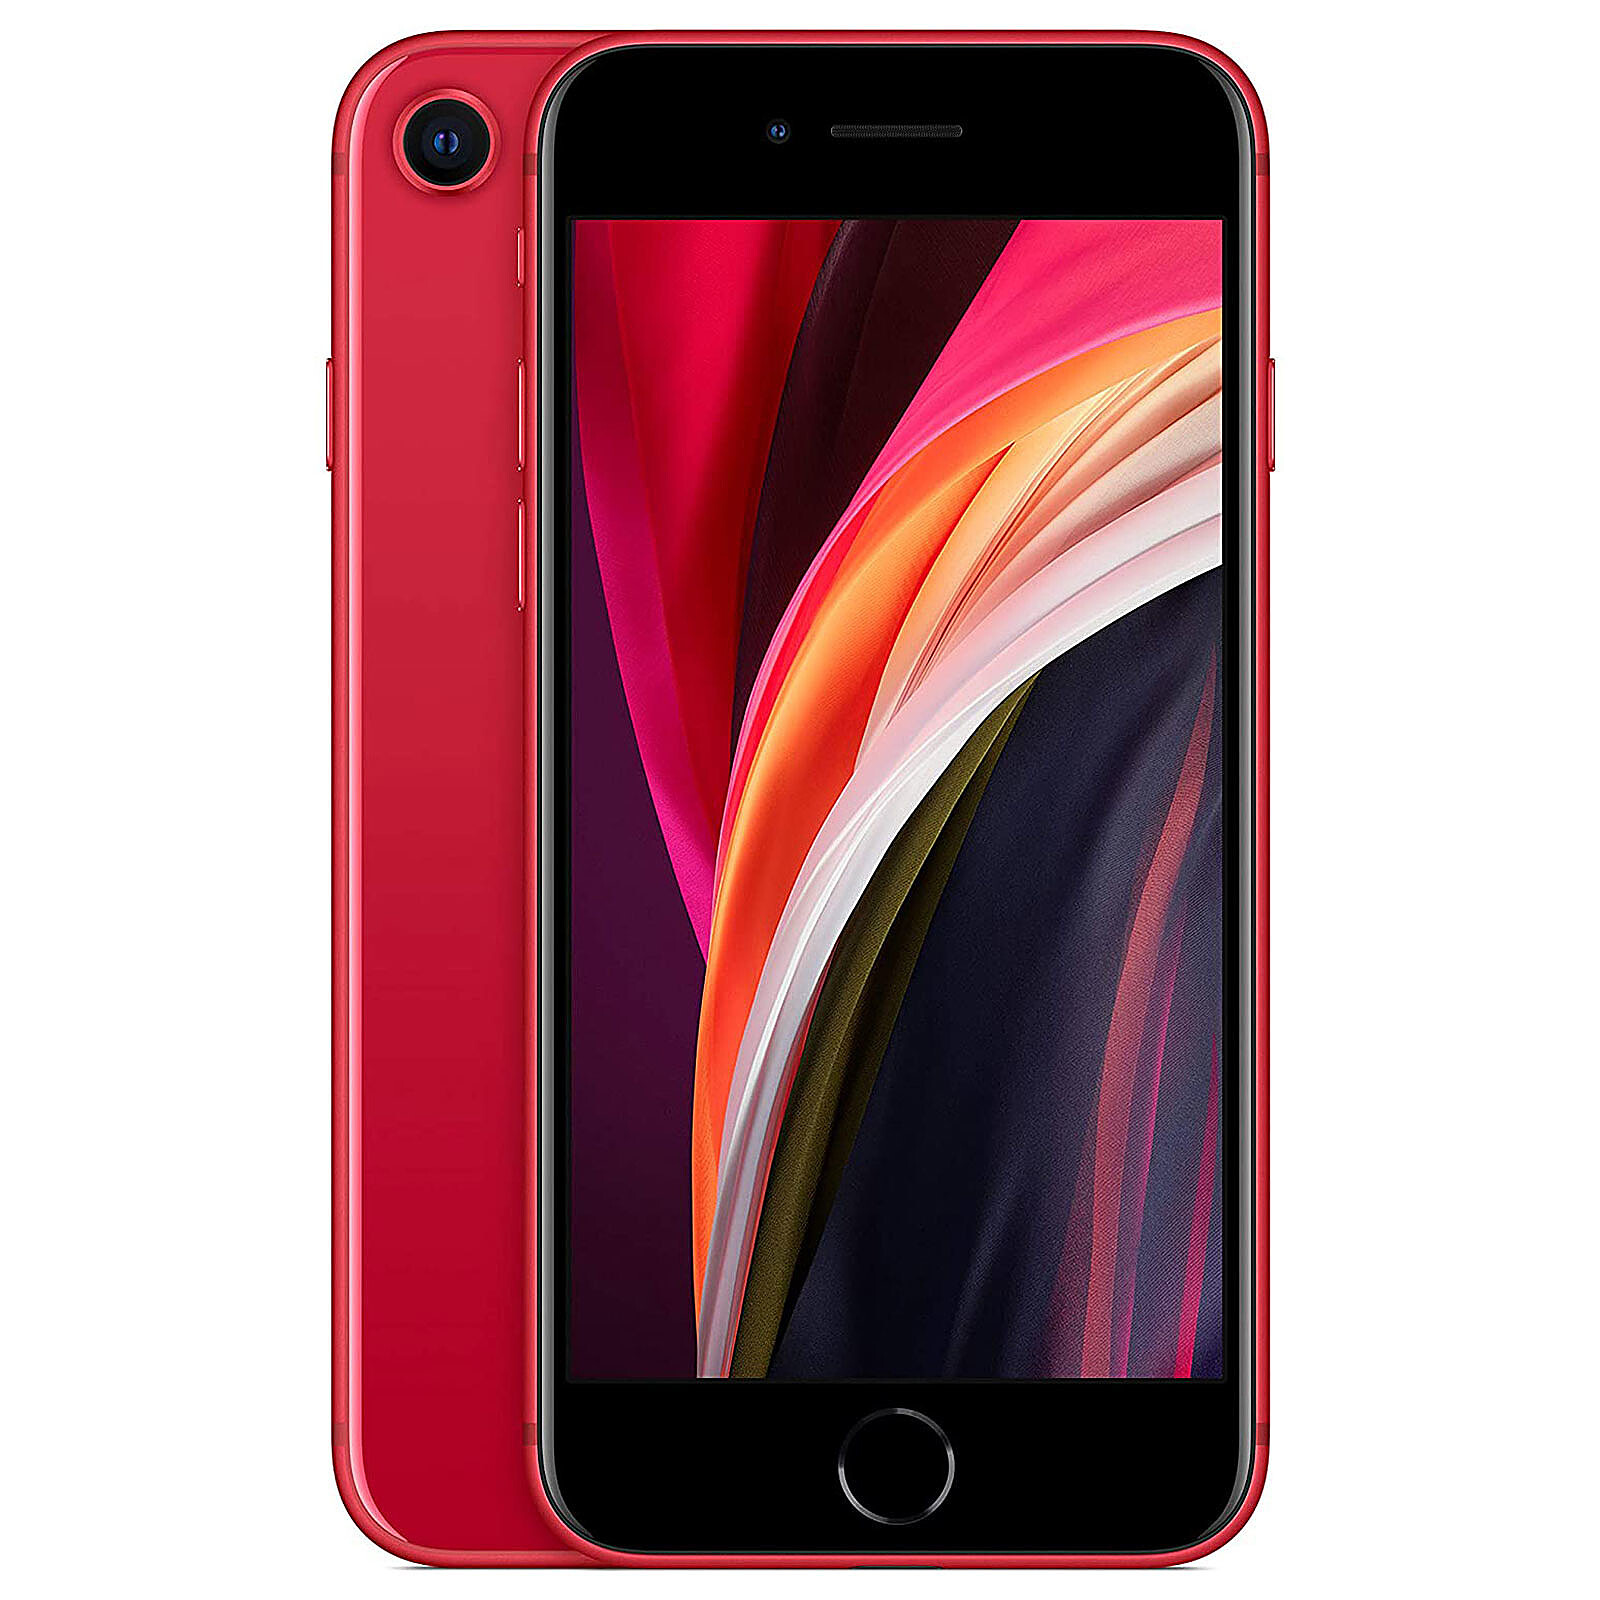 Apple iPhone SE 64 GB (PRODUCT)RED - Mobile phone & smartphone